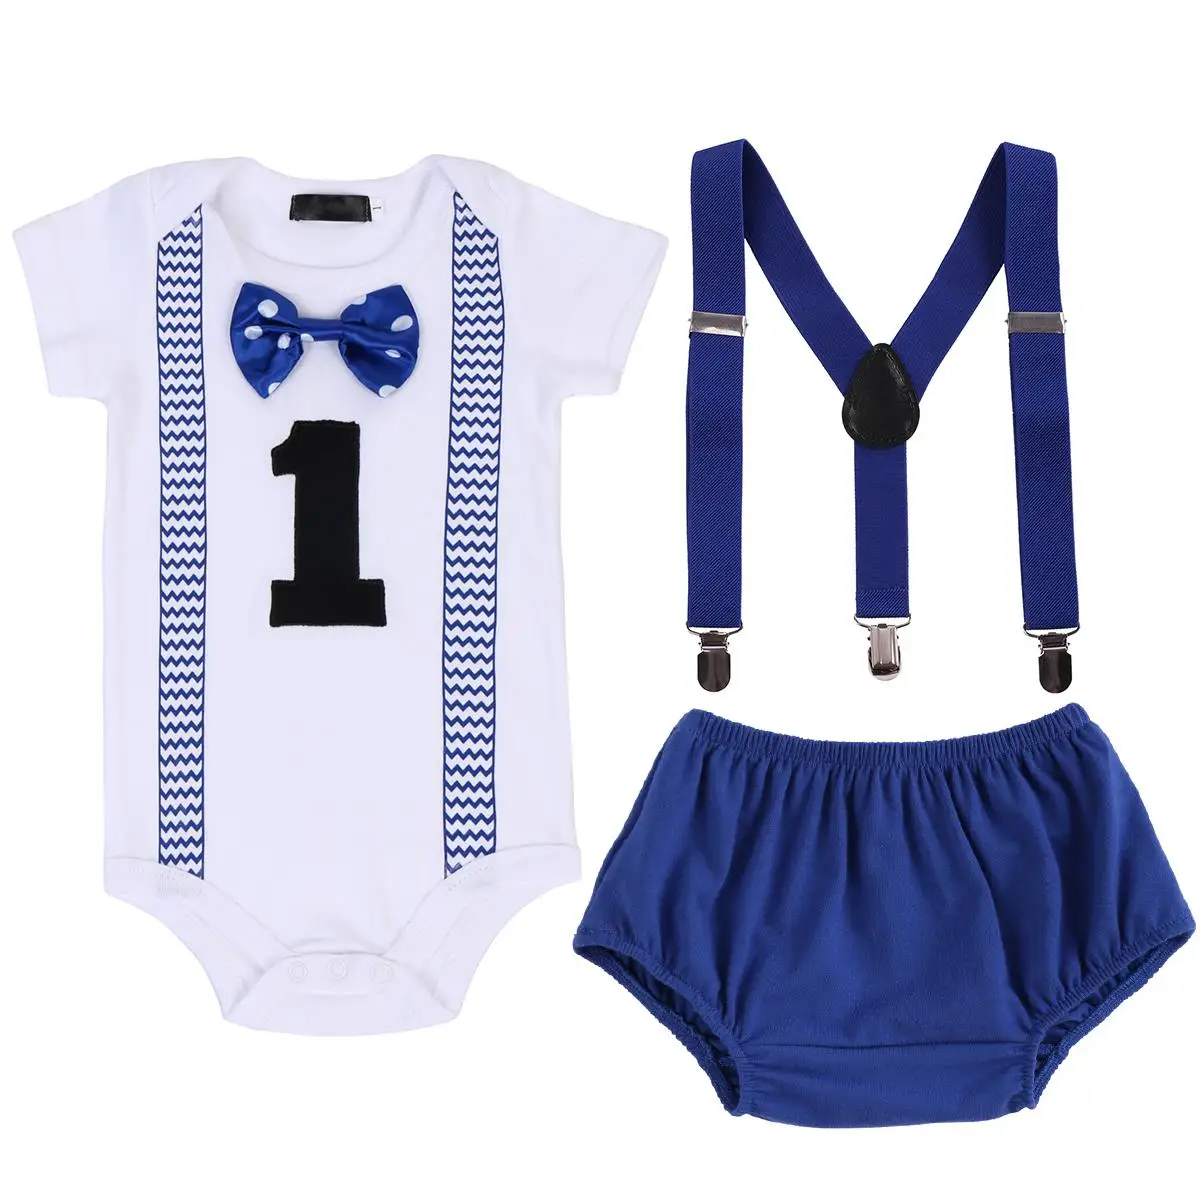 1Y Baby Boy Clothes Set Summer Cake Smash Clothing Short Sleeve Round Neck Jumpsuit With Suspenders Diaper Pants 3pcs Outfits